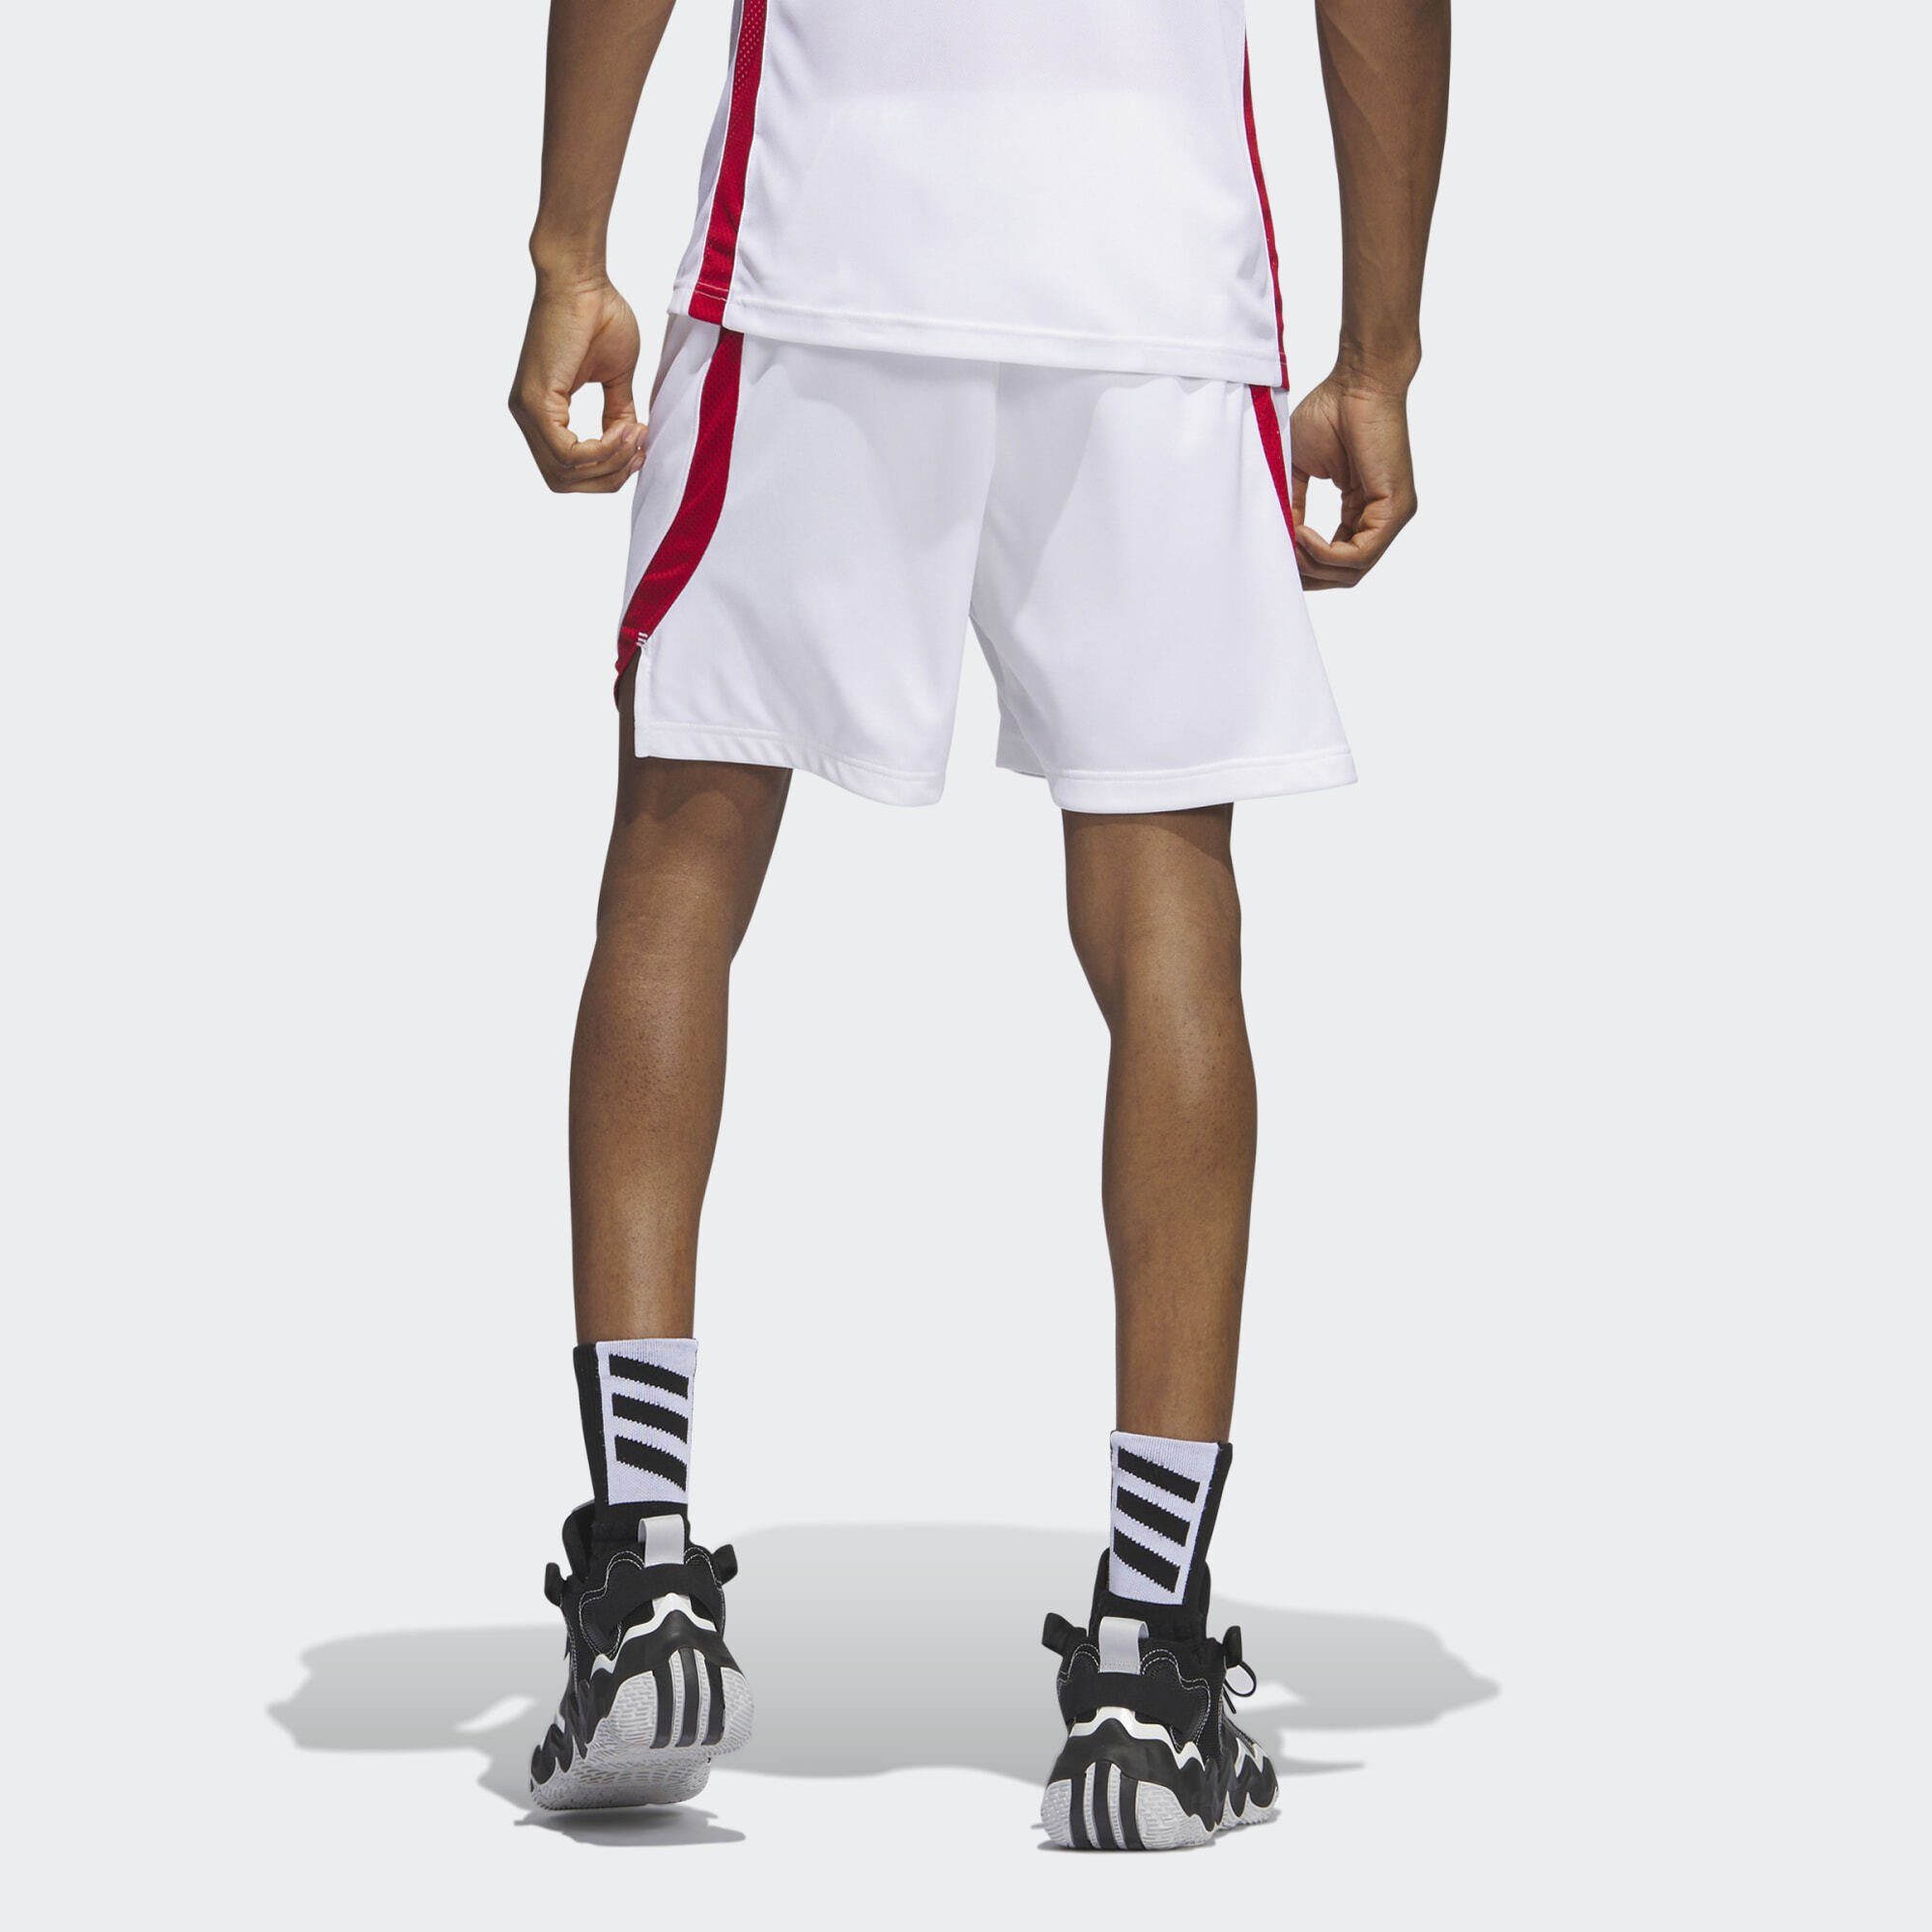 adidas Funktionsshorts Performance / SQUAD Power ICON White SHORTS Red Team